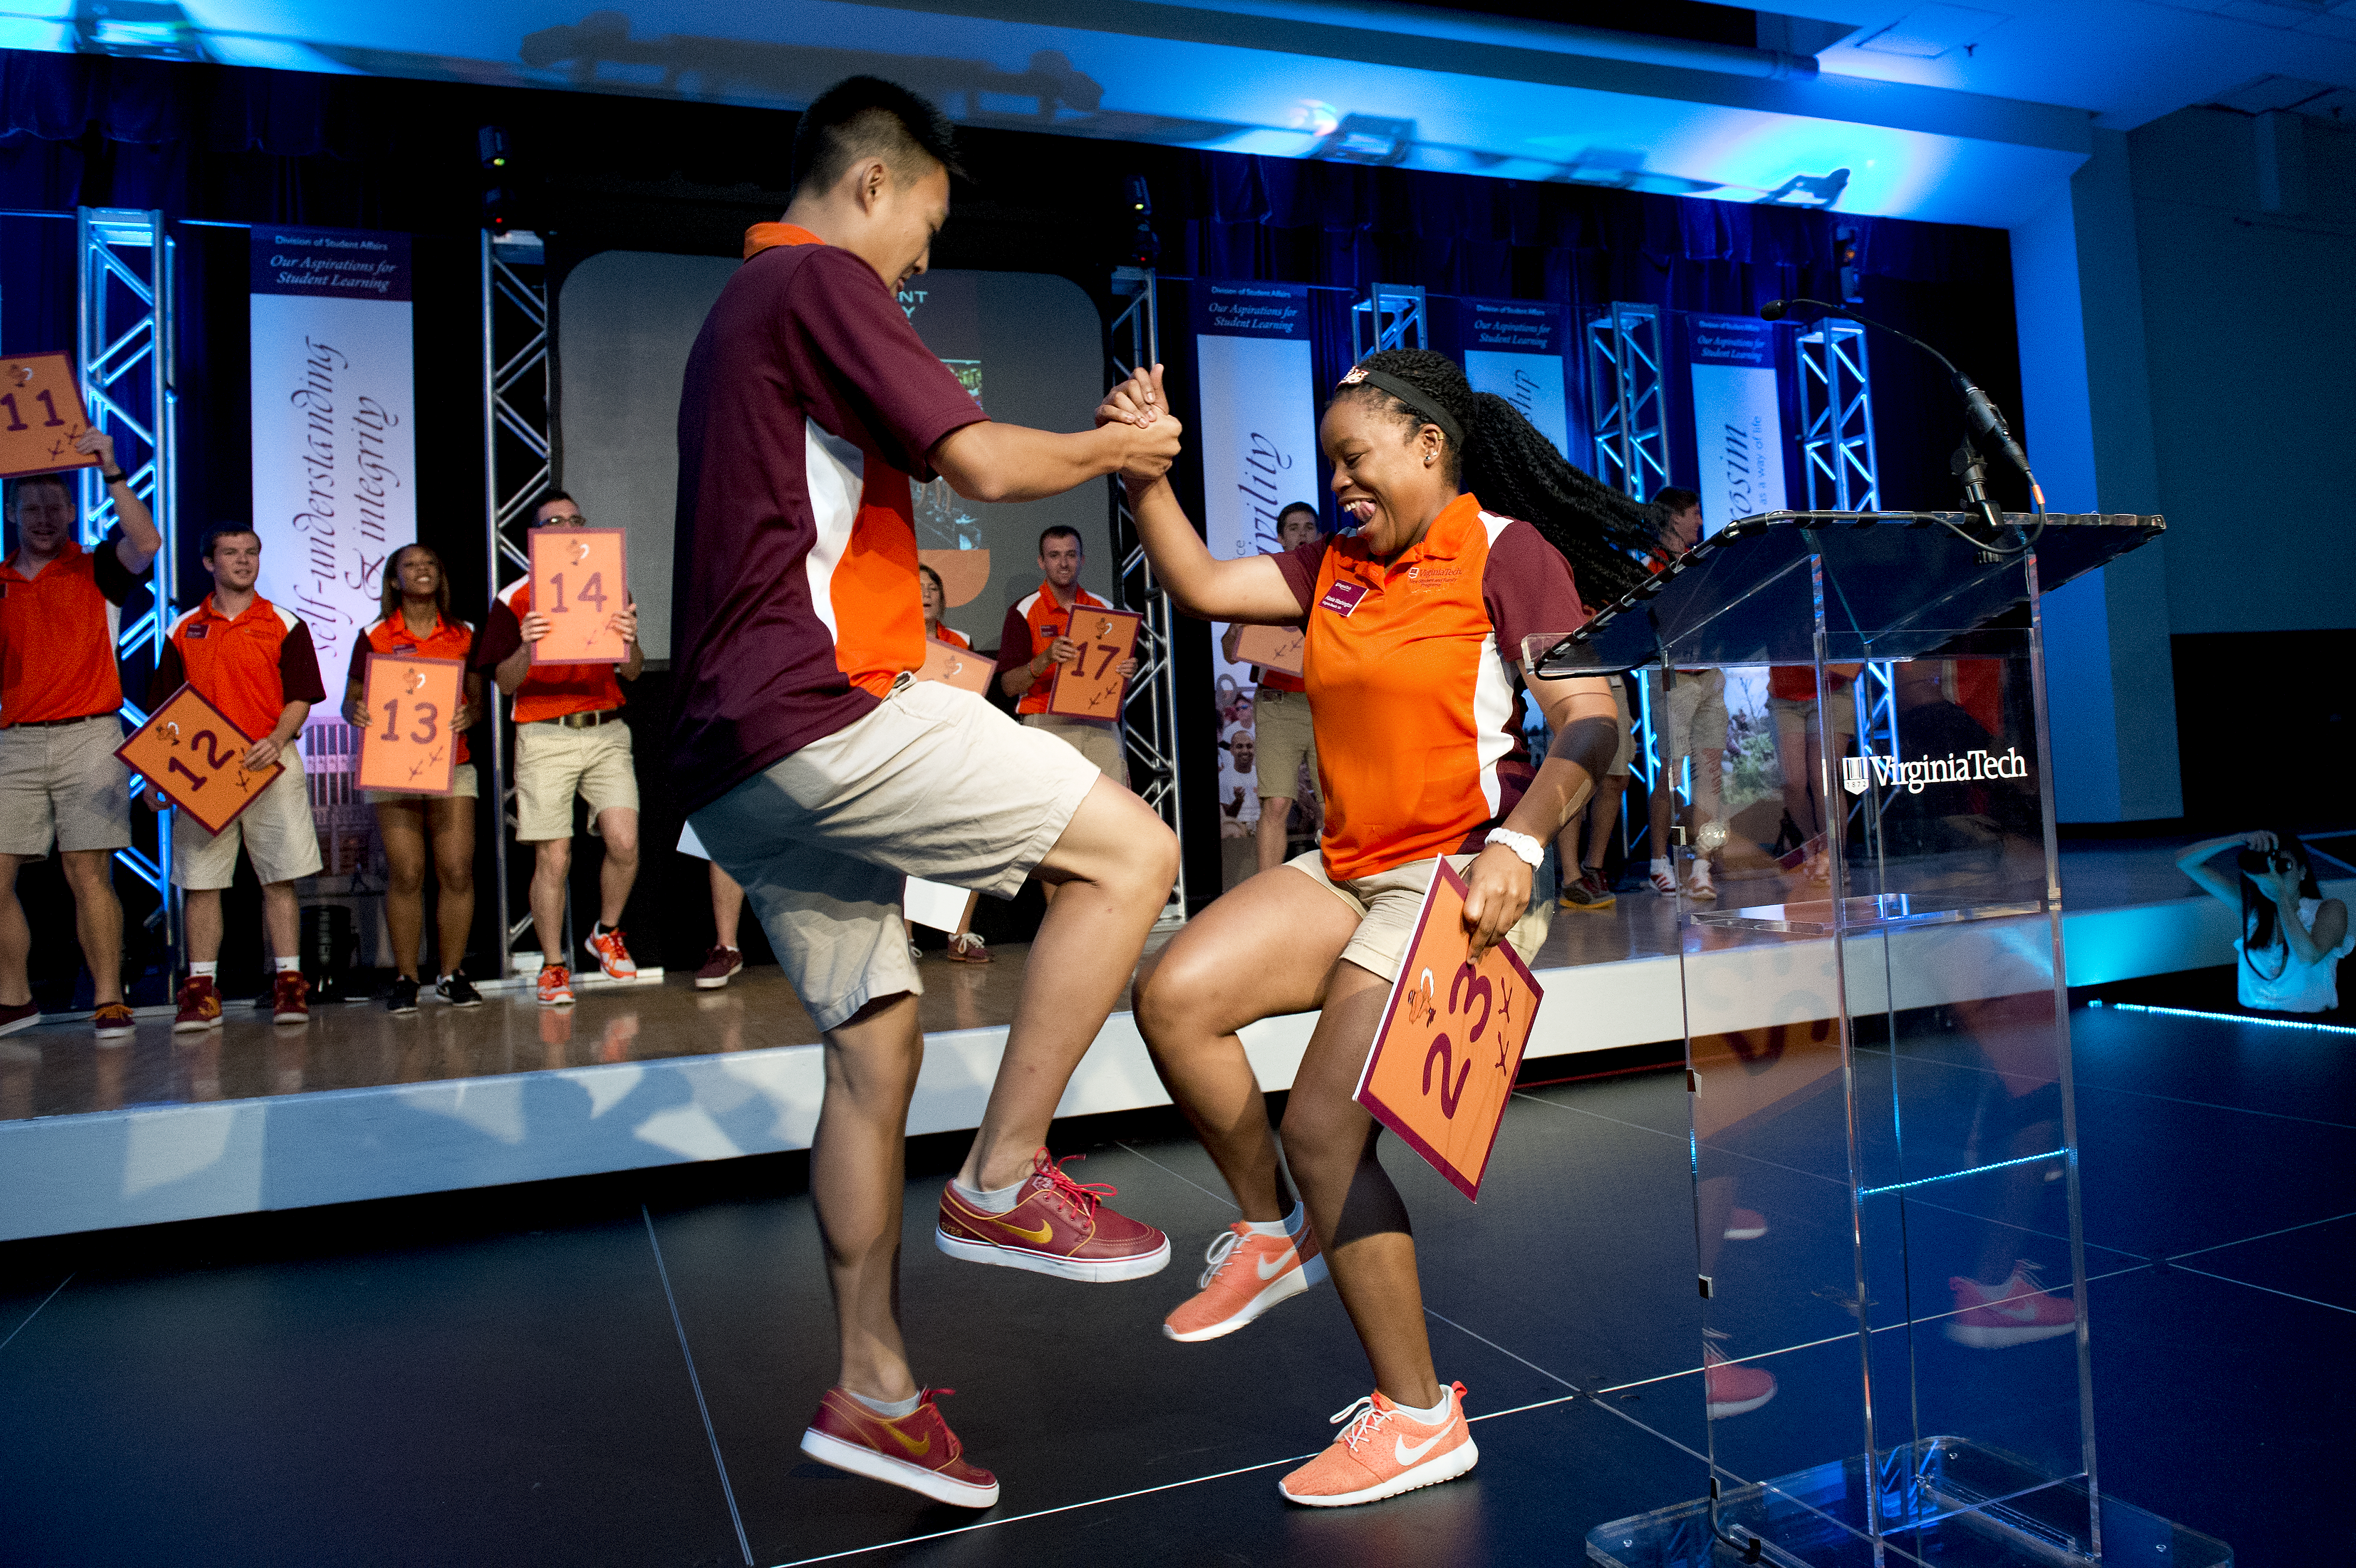 Two Orientation staff members do a handshake on stage at the opening session of Orientation.